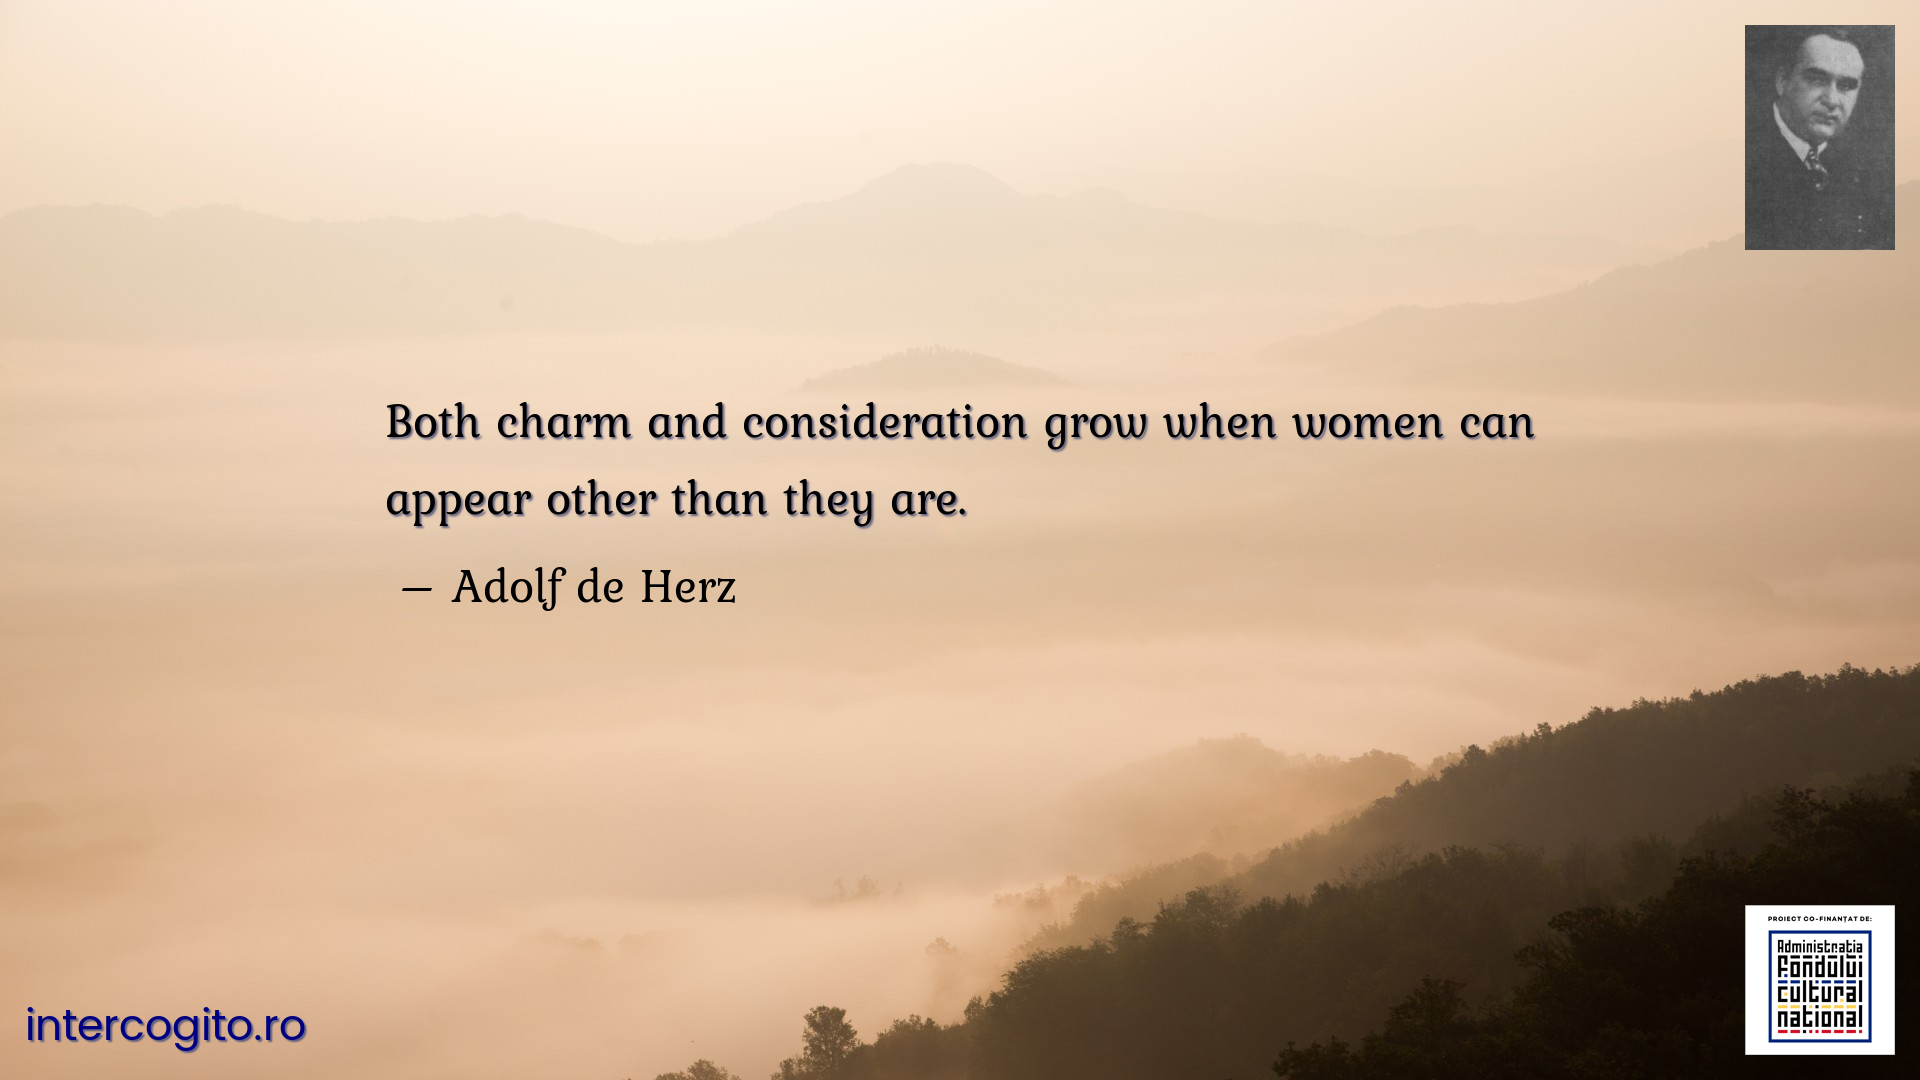 Both charm and consideration grow when women can appear other than they are.